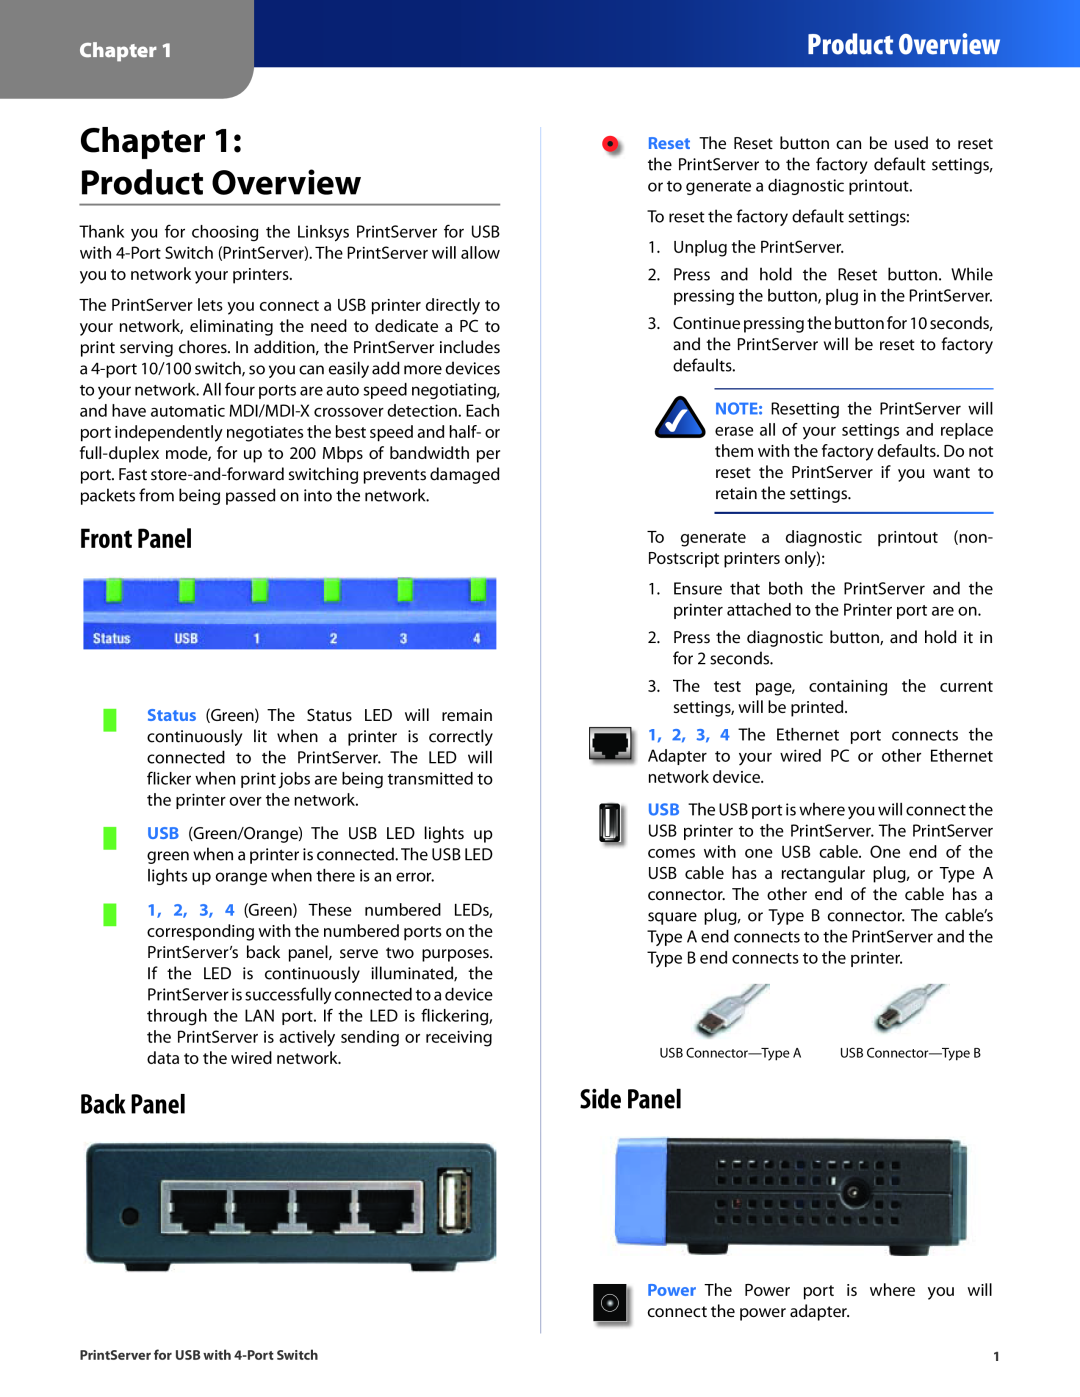 Cisco Systems PSUS4 manual Chapter Product Overview, Front Panel, Back Panel, Side Panel 